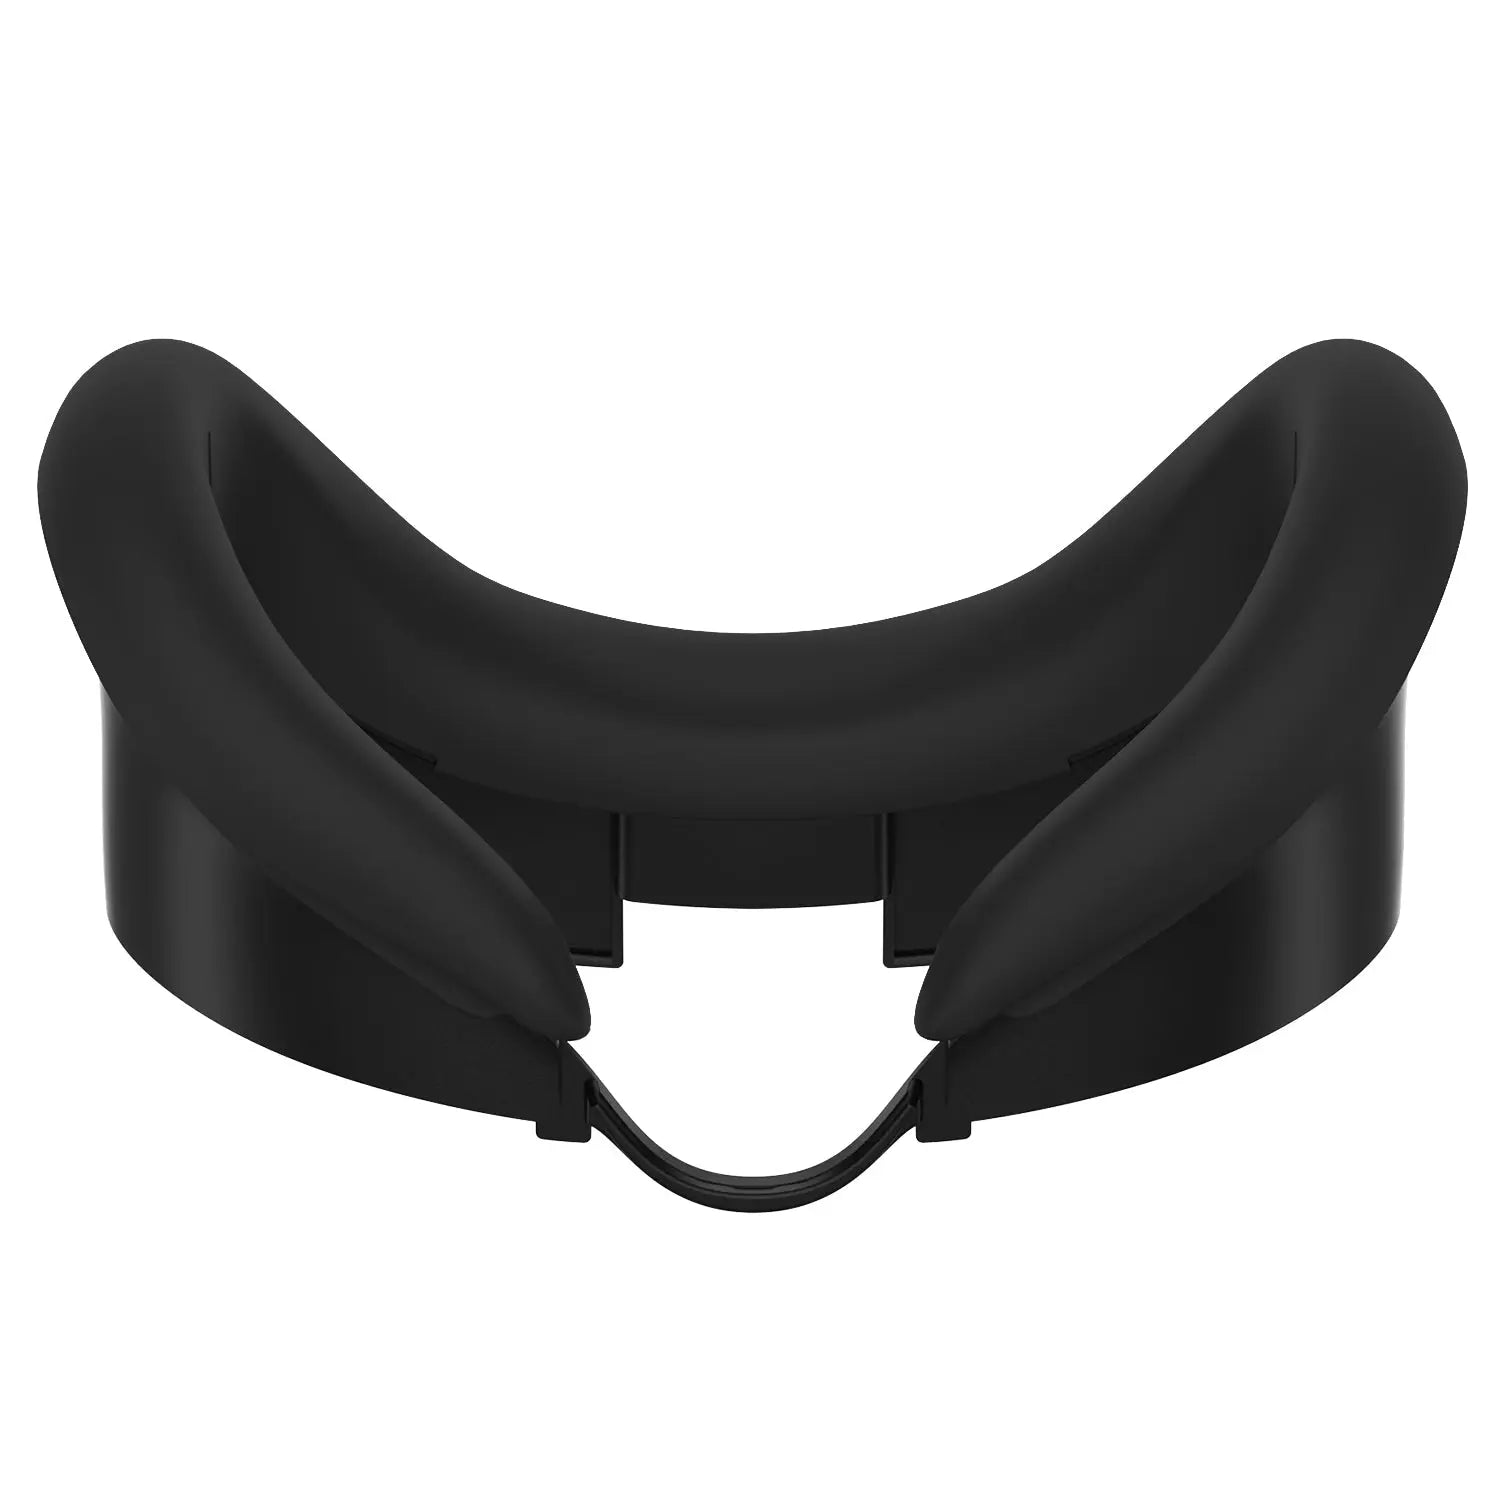 AMVR Face Cover Compatible with Meta/Oculus Quest 3 Headset Accessories,  Comfy Silicone Face Cushion Pad Fits Facial Interface, Sweatproof VR Mask  to